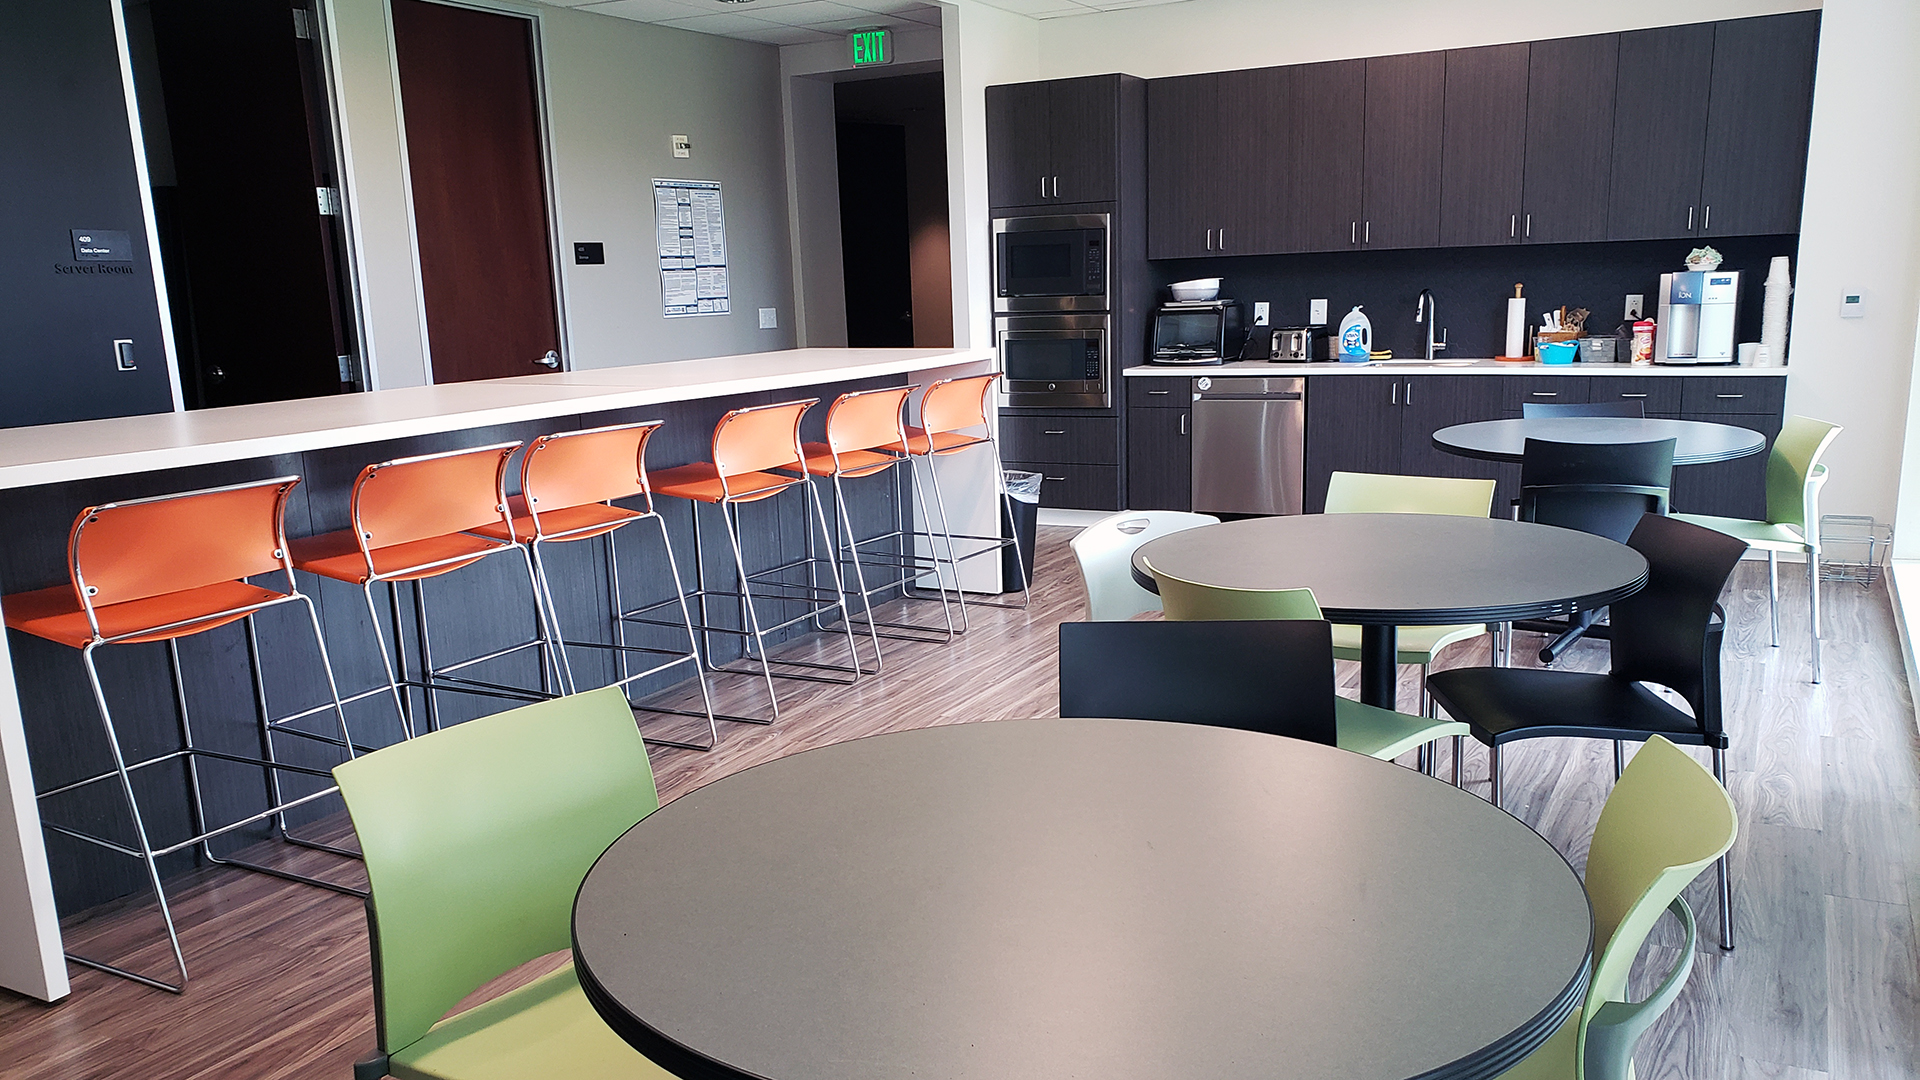 Image of Breakroom seating and kitchen area